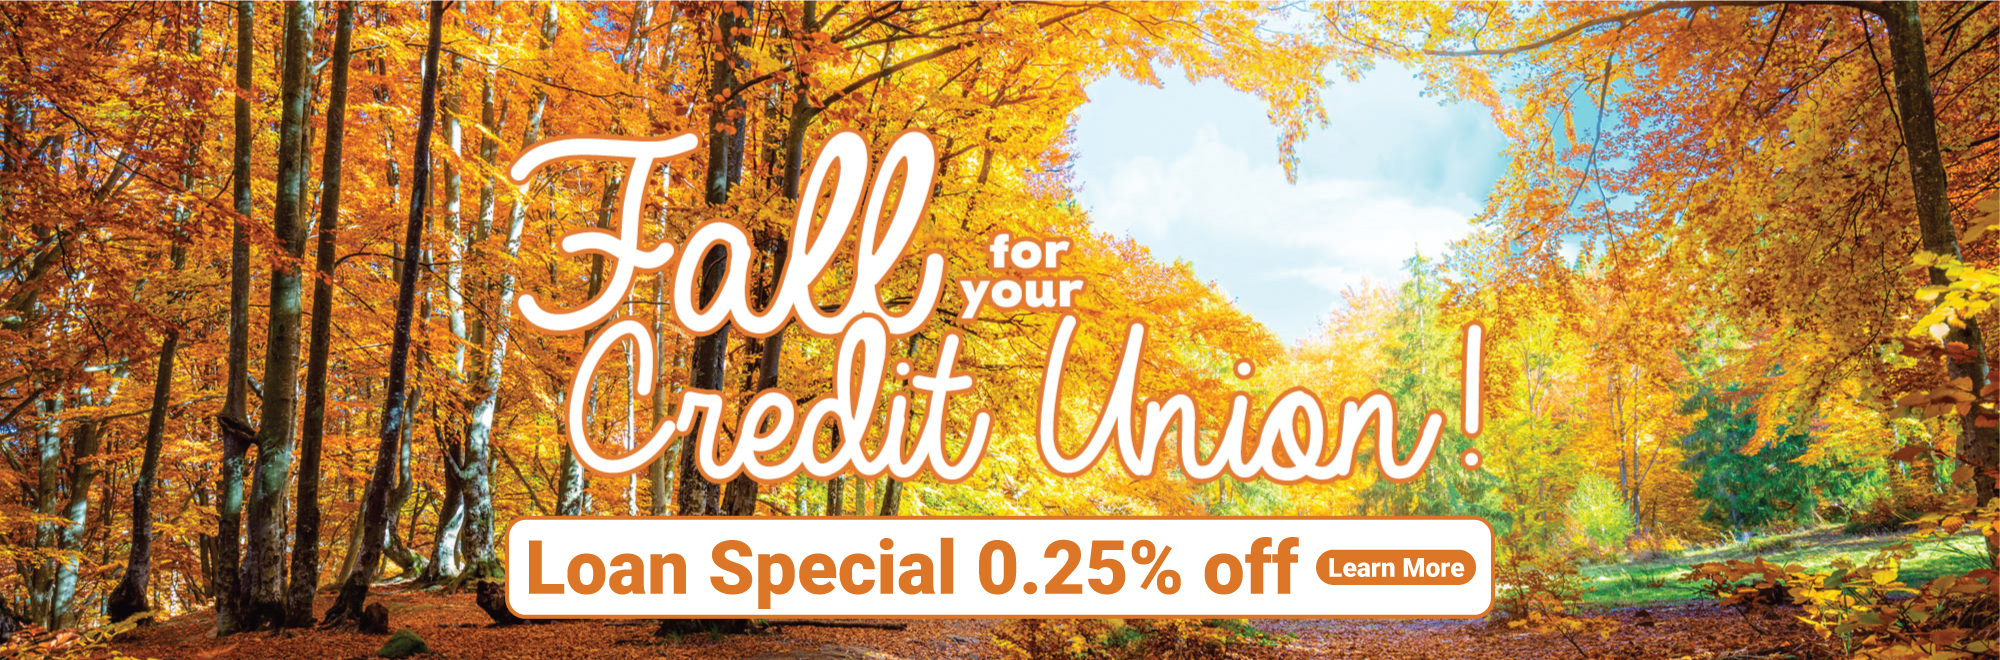 Fall Loan Special 0.25% off*